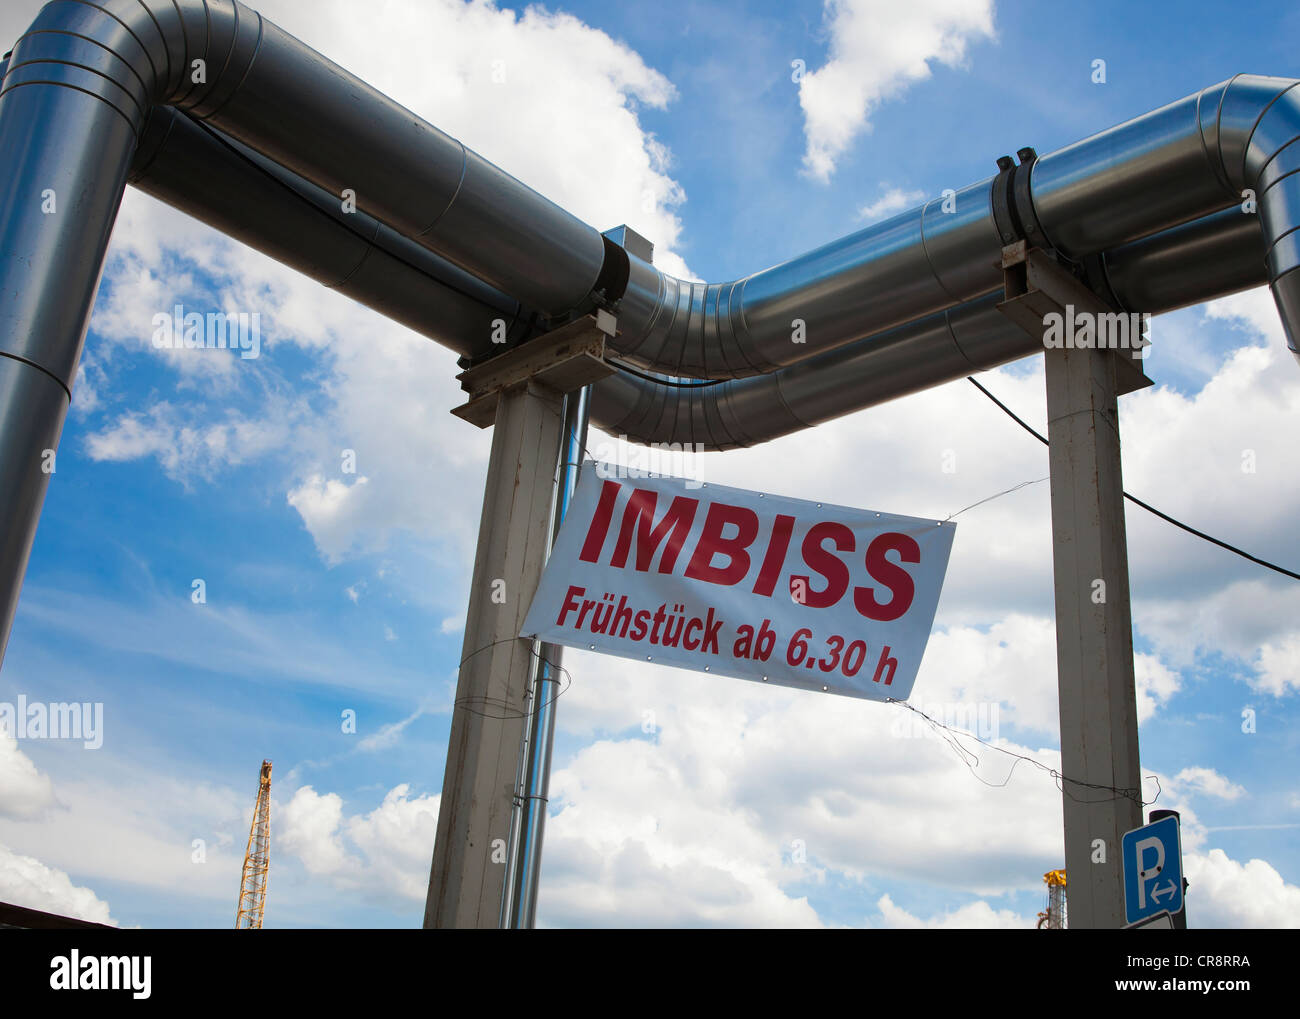 Sign for an Imbiss, German for 'snack bar', offering breakfast from 6:30am, at a construction site, Berlin, Germany, Europe Stock Photo